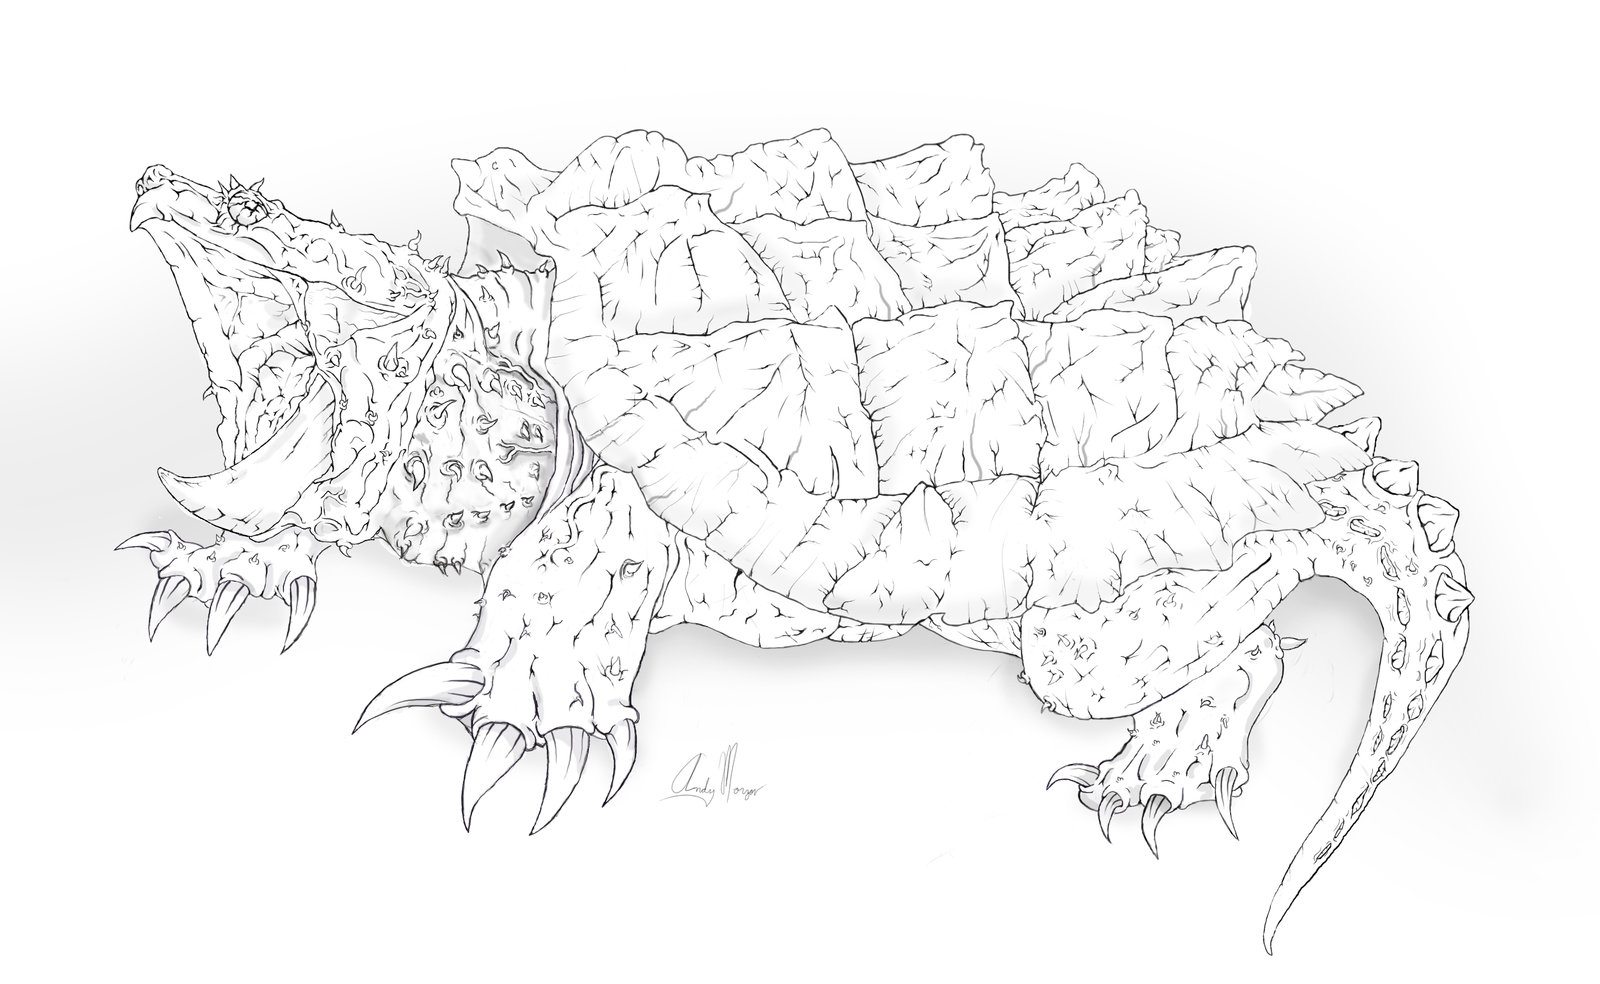 Alligator Snapping Turtle coloring #7, Download drawings